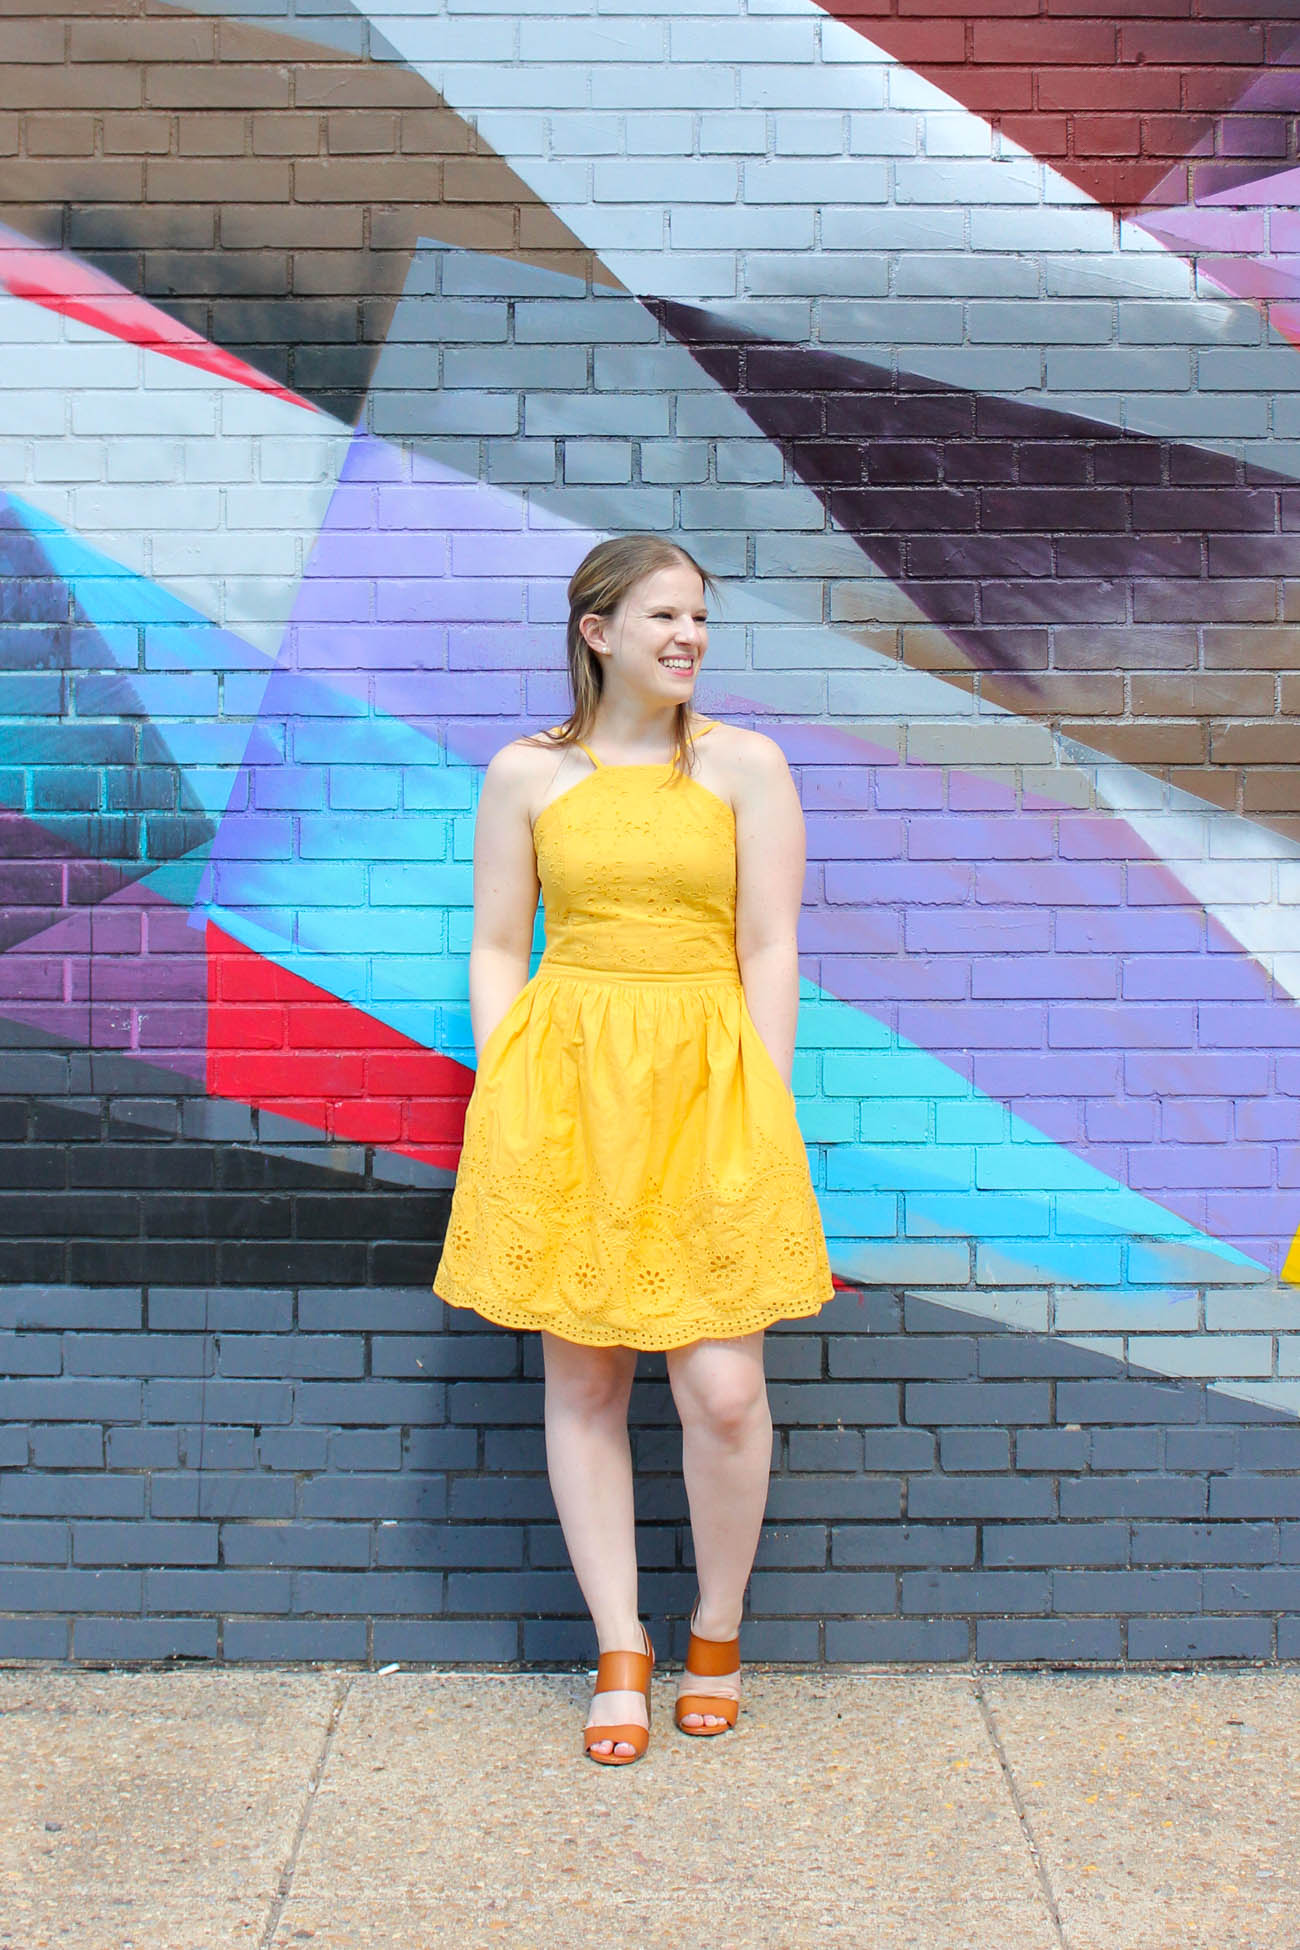 The Dress that Made Me Start Loving Abercrombie and Fitch | Something Good, @danaerinw , abercrombie and fitch eyelet dress, halter dress, yellow dress, women, fashion, clothing, style, women's clothing, women's fashion, women's style, wedges, heels, sandals, murals, mural, inspiration, dress, yellow halter dress, fit and flare dress, fit'n'flare dress, yellow halter, abercrombie and fitch, abercrombie & fitch, summer styles, summer fashion, summer dresses, garden dresses, party dresses, wedding guest dresses, wedding dresses, 